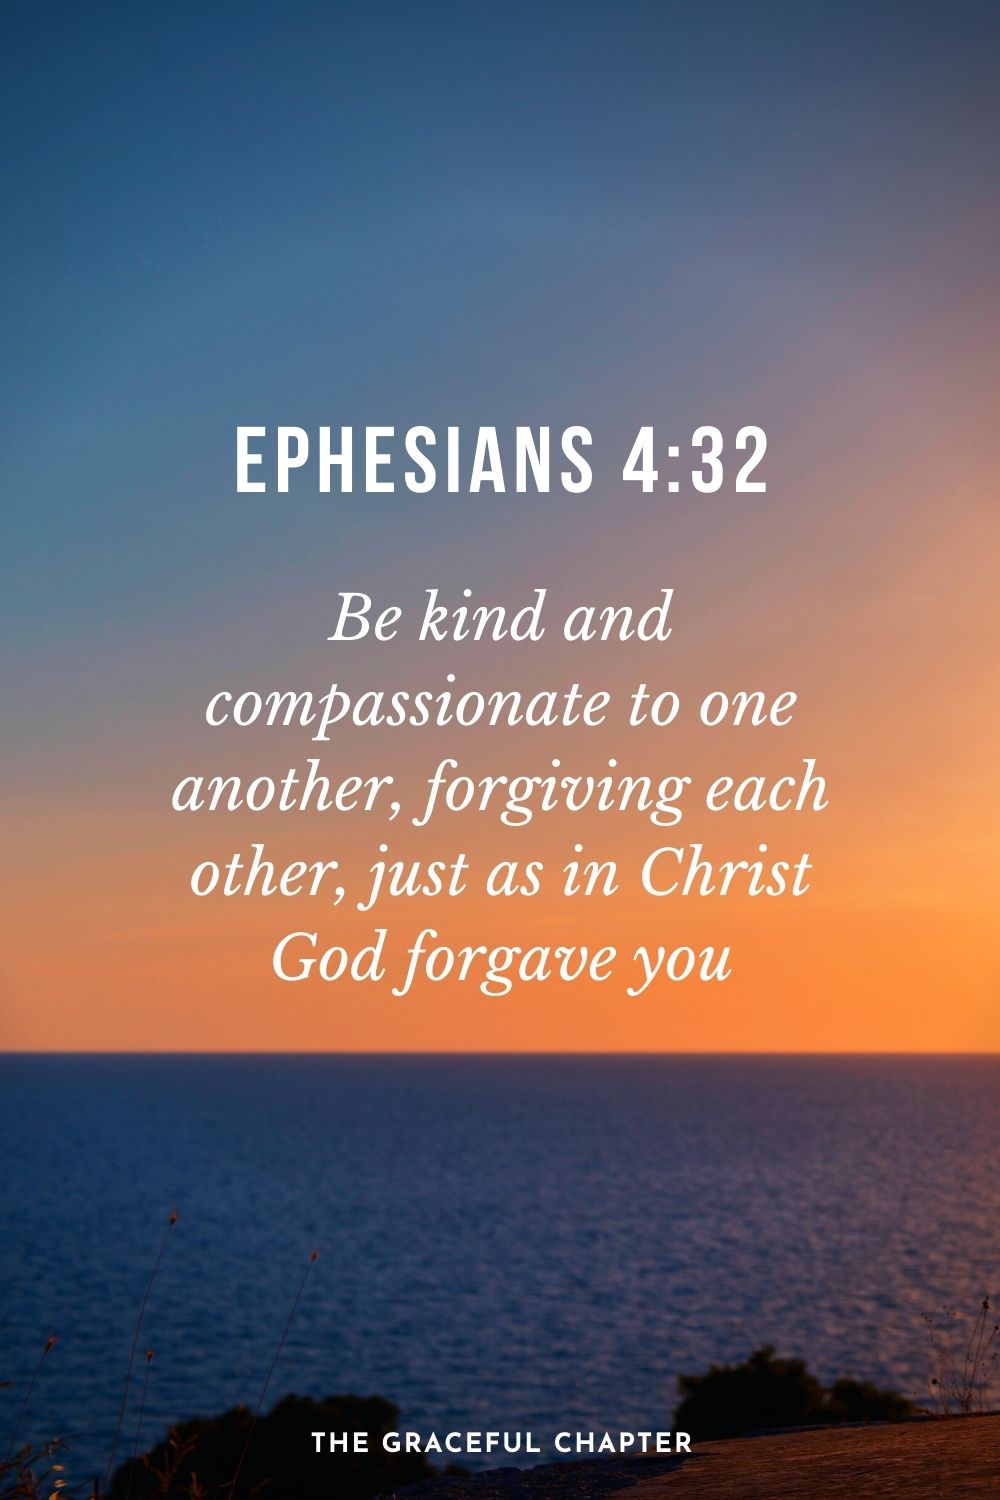 Be kind and compassionate to one another, forgiving each other, just as in Christ God forgave you. Ephesians 4:32